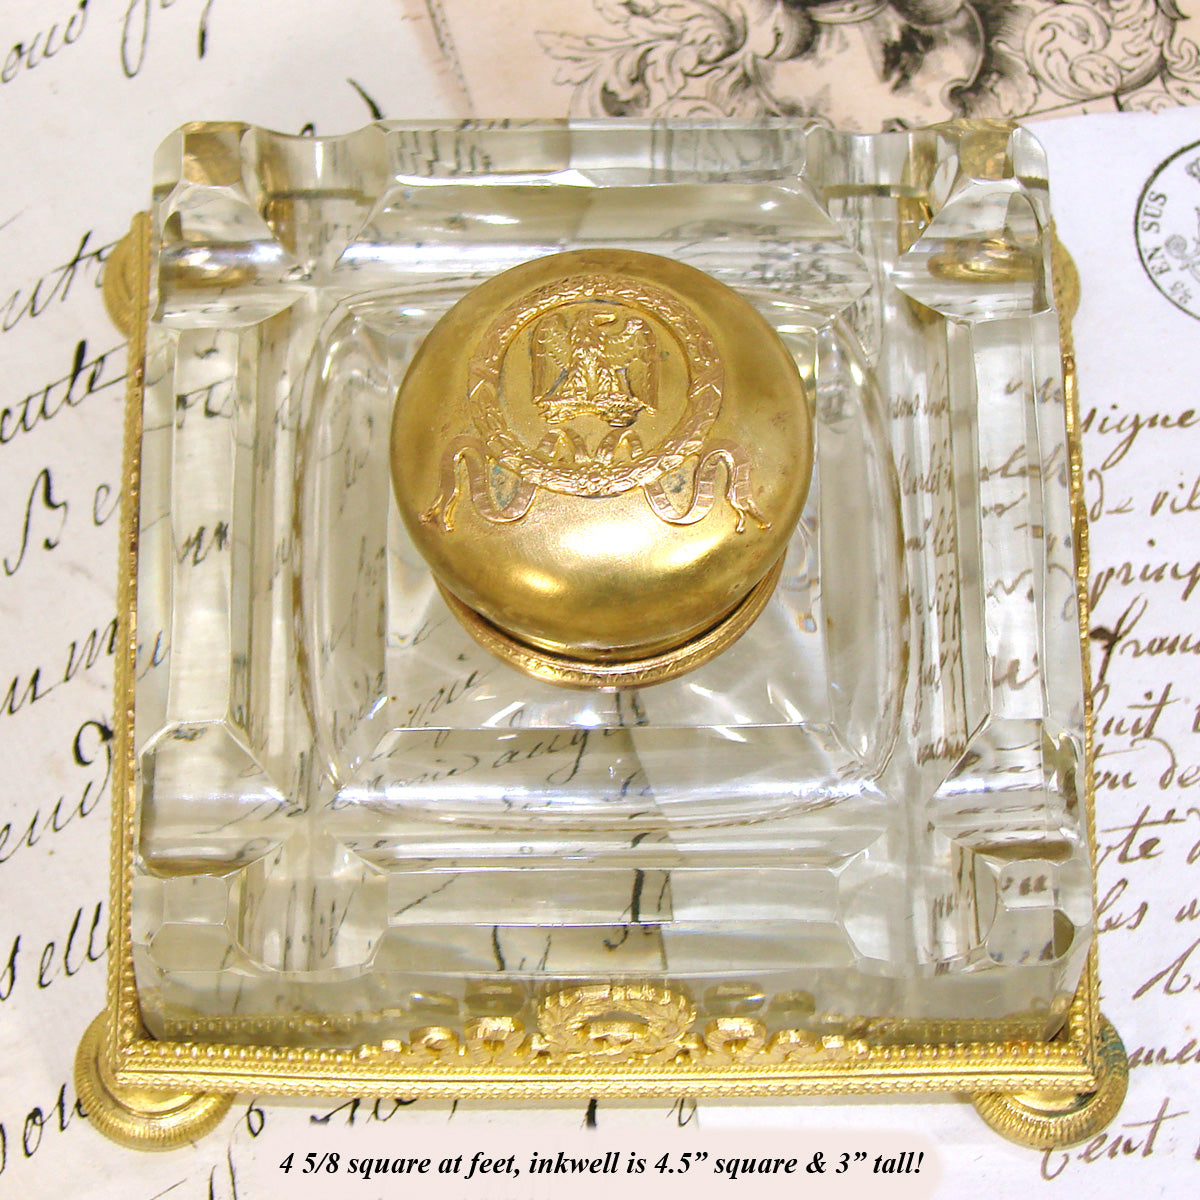 Antique French Napoleon III Empire Revival 4.5" Inkwell, Crystal & Gilt Bronze, Griffins & Eagle